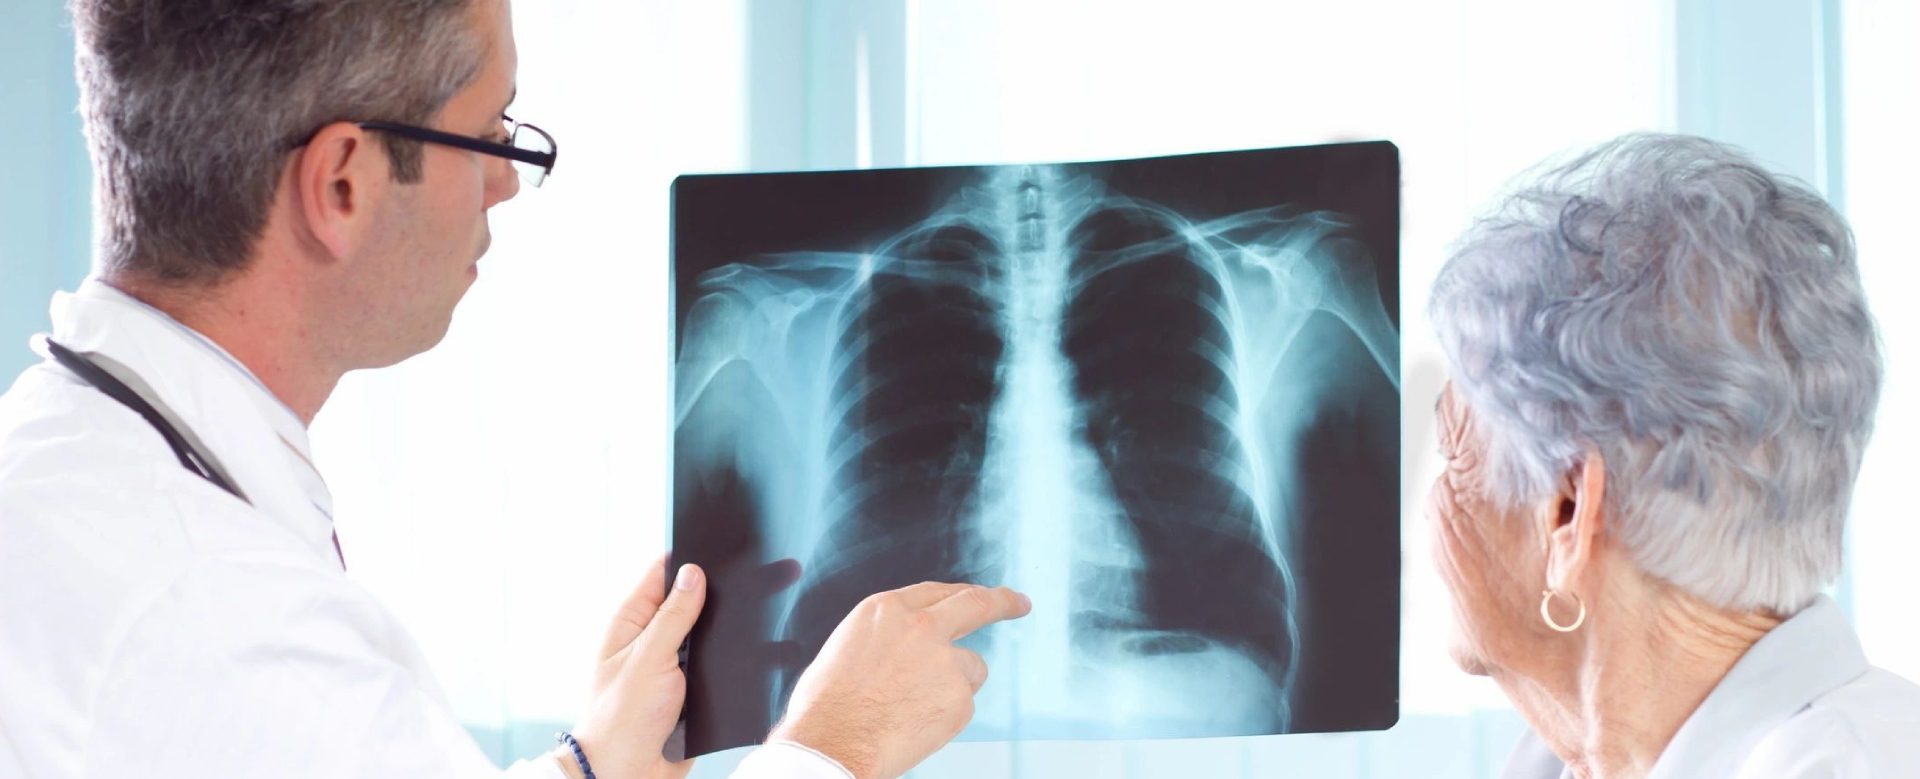 A person points to an x-ray of their chest.